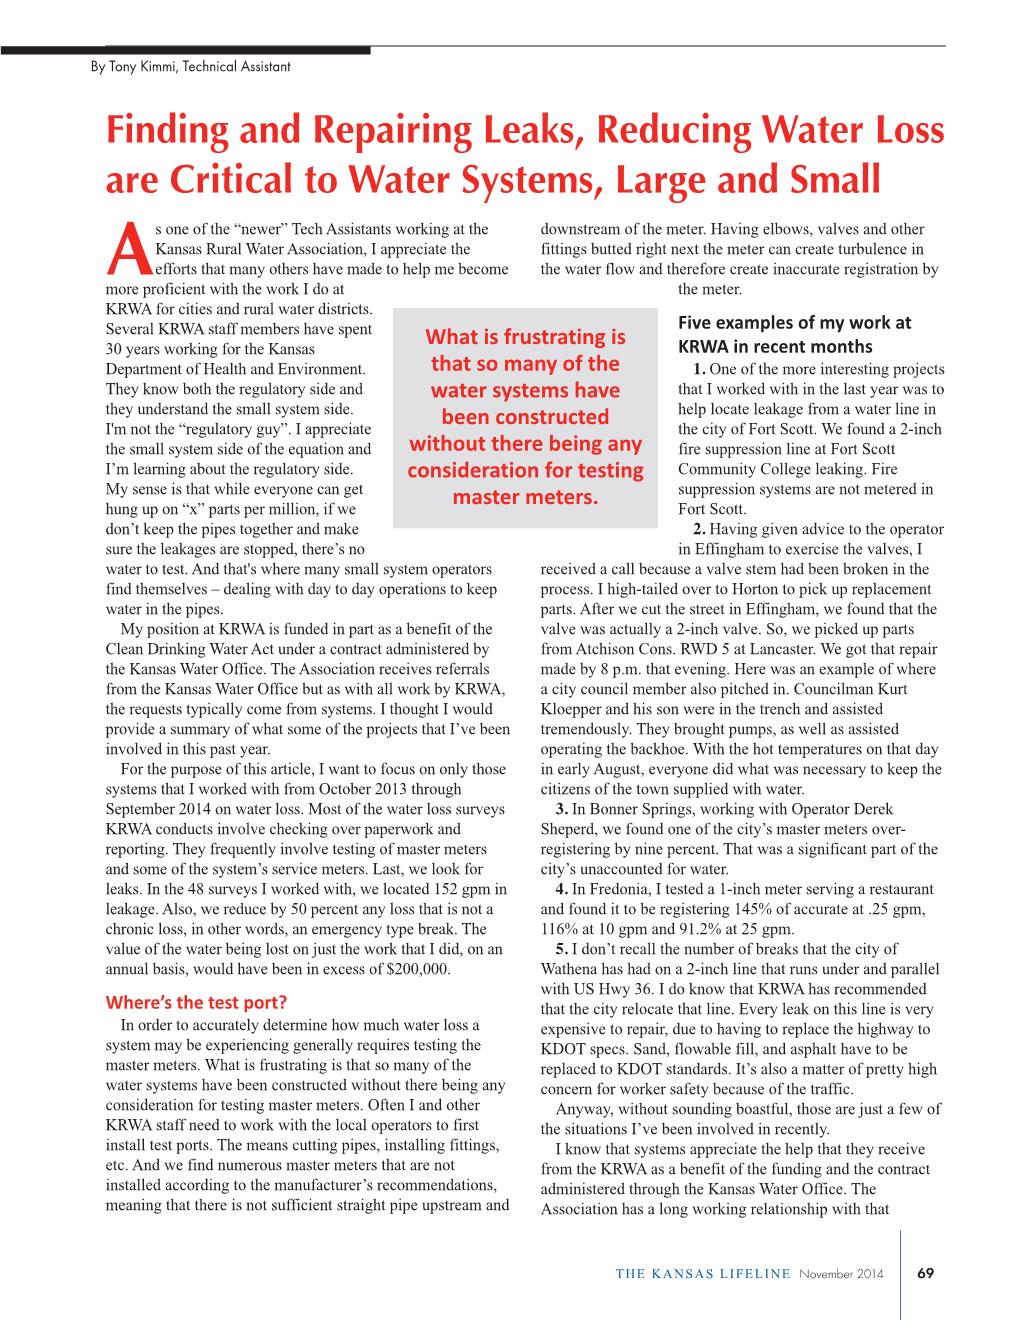 Finding and Repairing Leaks, Reducing Water Loss Are Critical to Water Systems, Large and Small